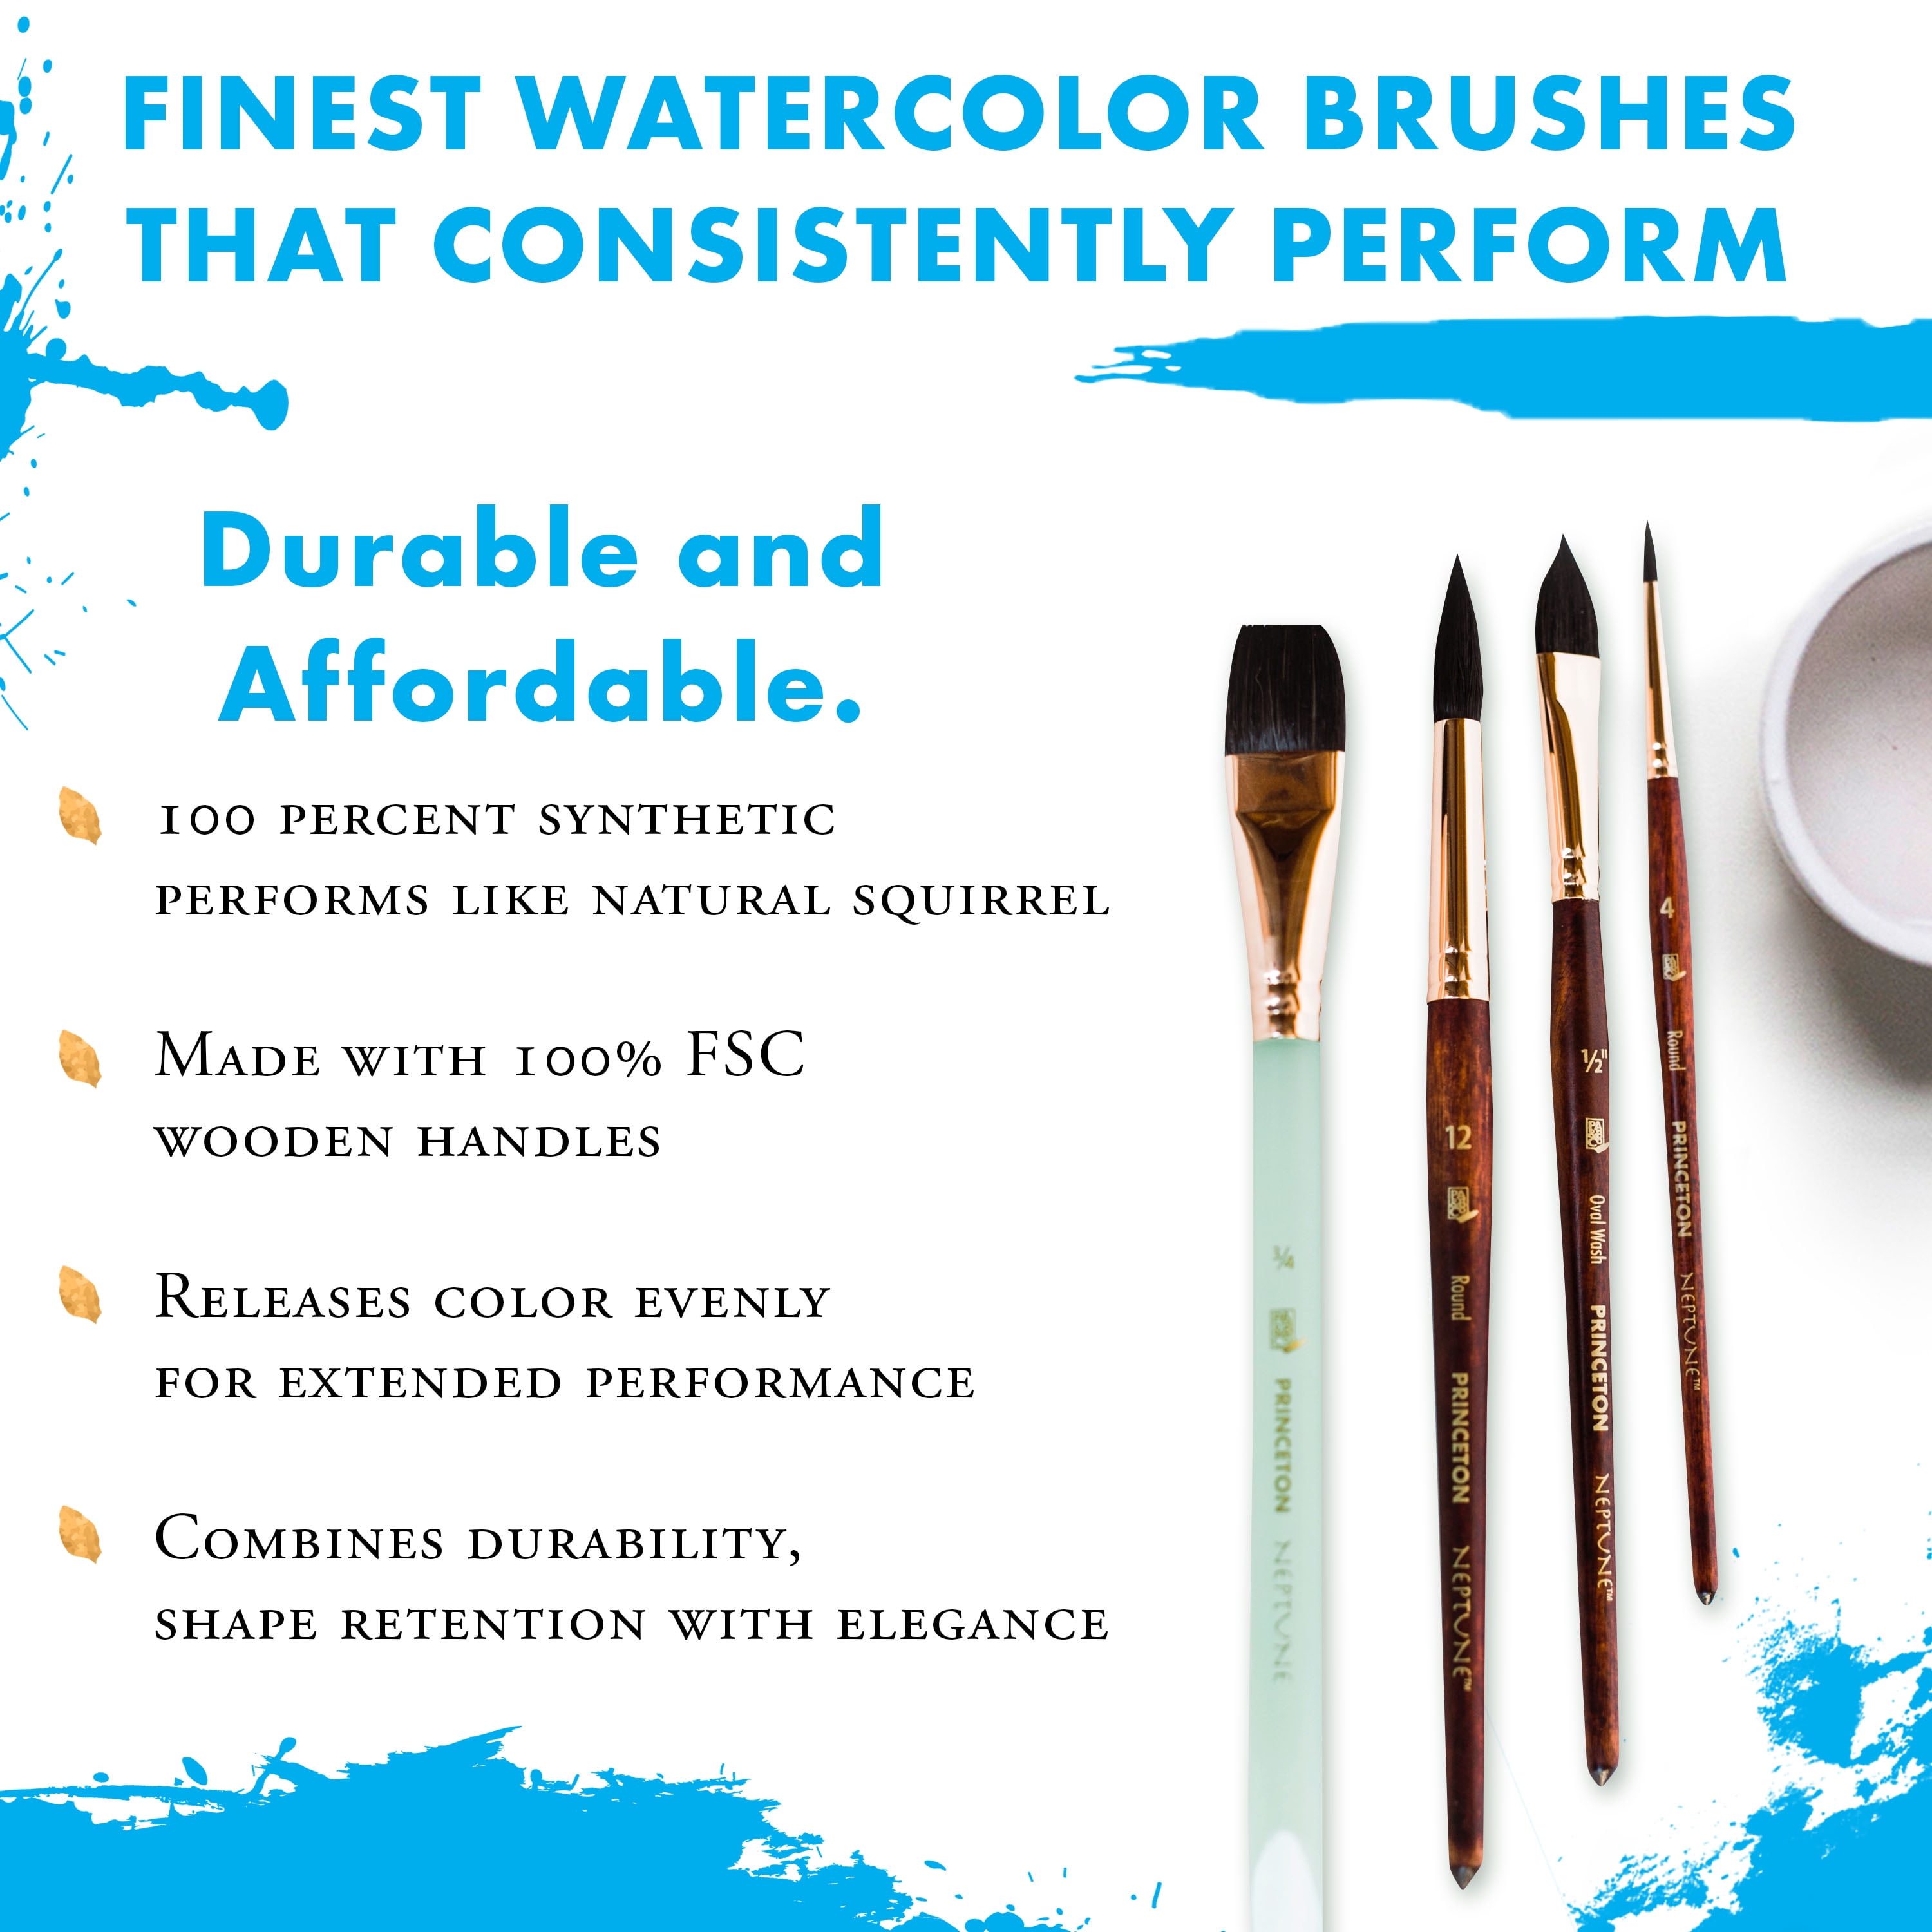 Princeton Neptune Round 8 Watercolor Brush - Unboxing and Review 